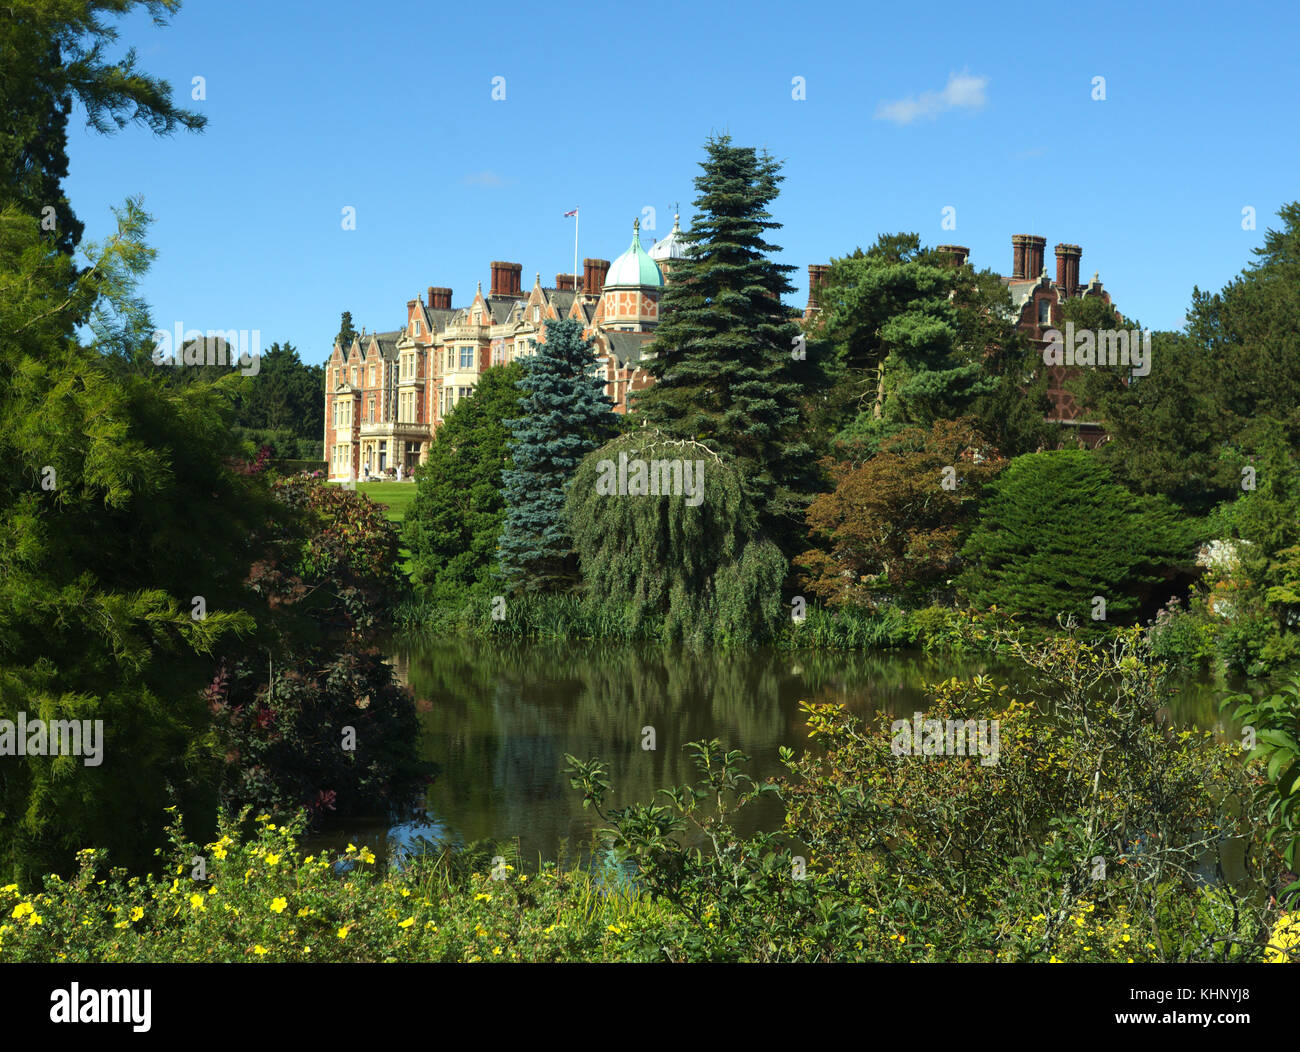 SANDRINGHAM HOUSE, NORFOLK, ENGLAND - AUGUST 10, 2017: A view of the house and grounds at Queen Elizabeth II's Sandringham Estate. Stock Photo